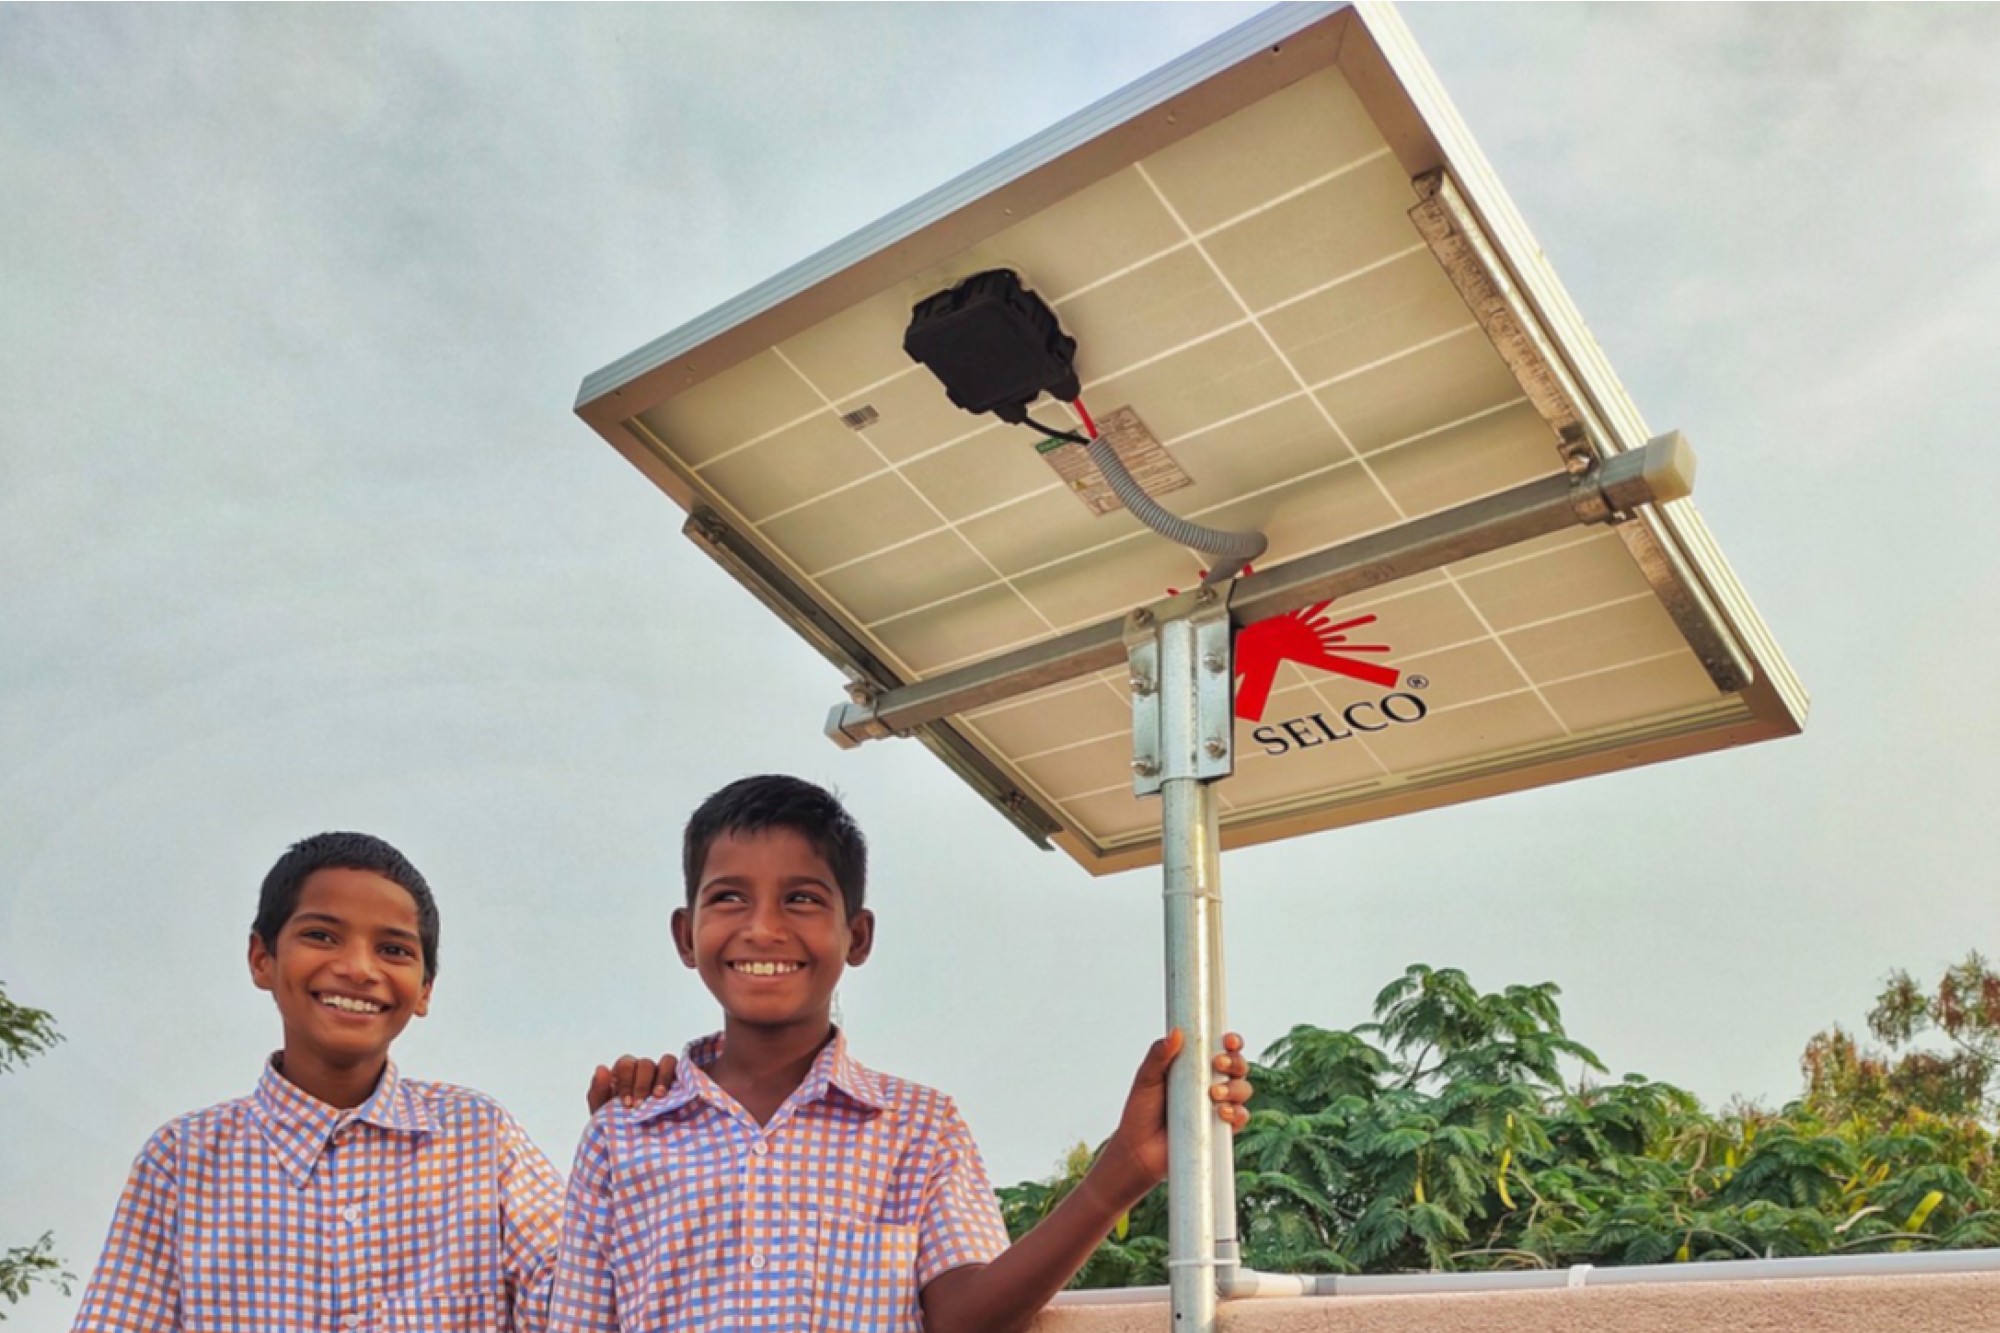 Apraava Energy transforms lives with solar solutions across India